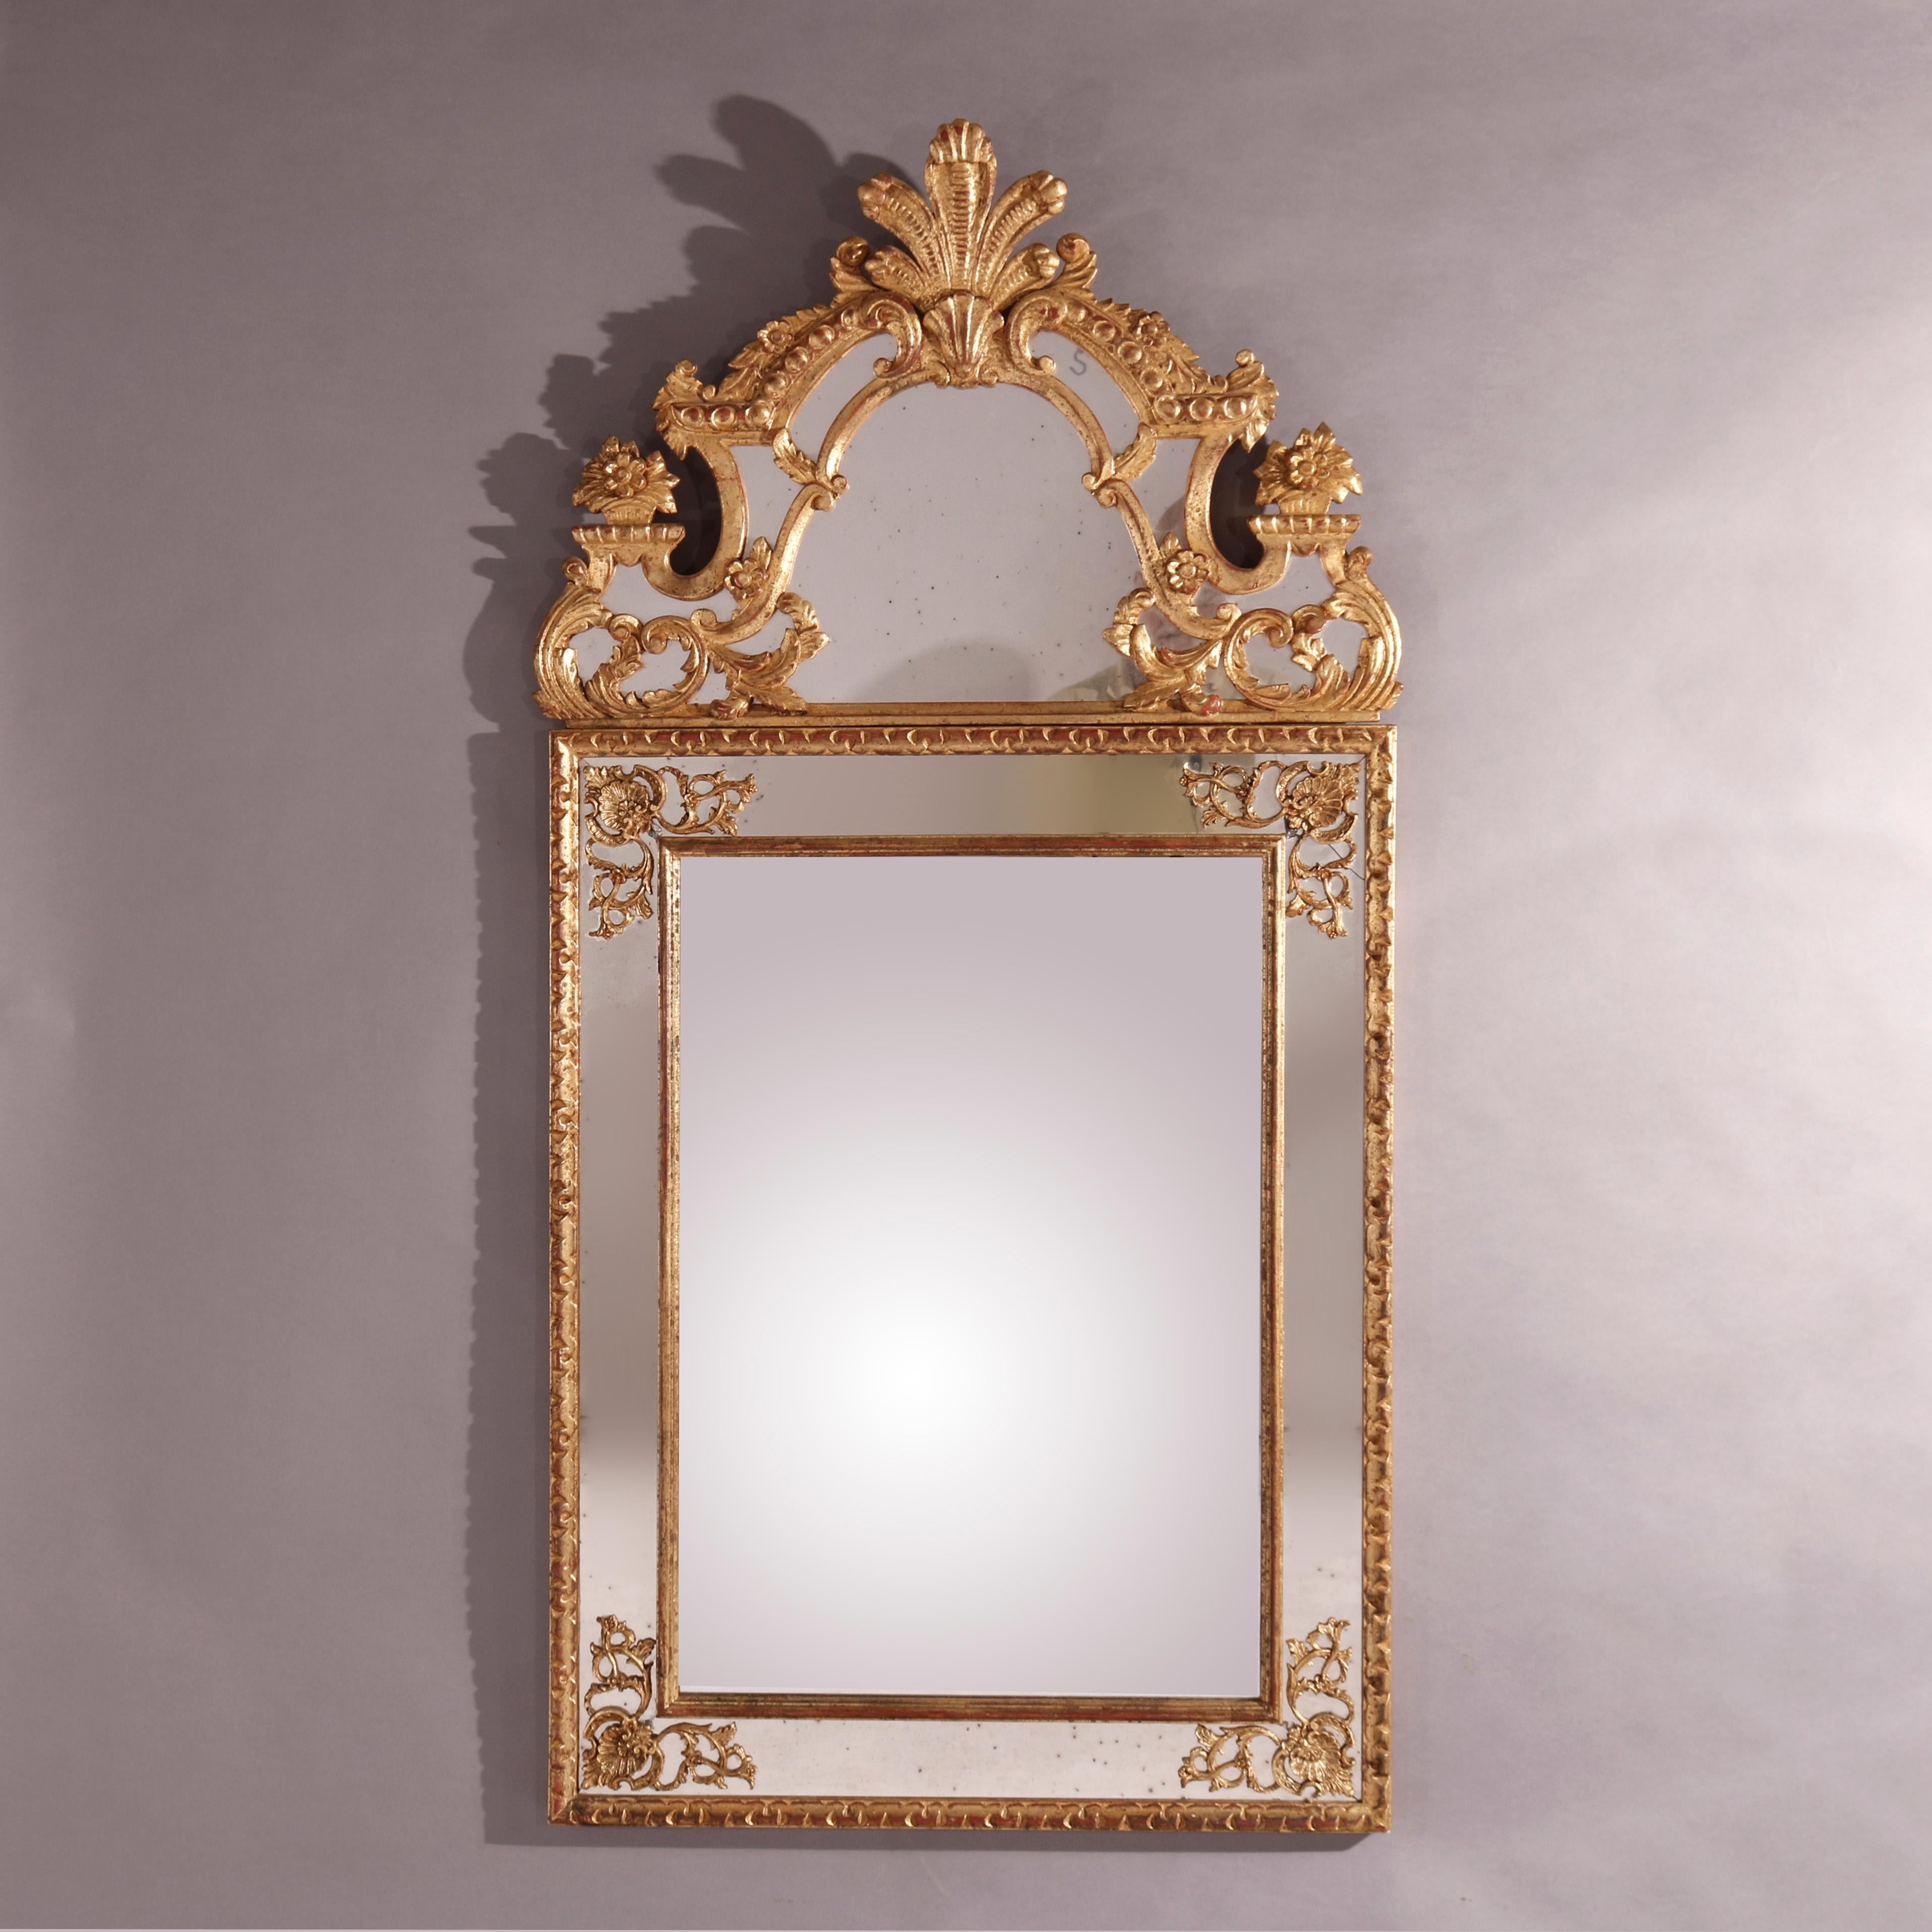 An oversized Italian over mantel parclose wall mirror offers giltwood construction in arched form with fleur de lis foliate and floral, scroll and foliate elements throughout, 20th century.
Measures - 60